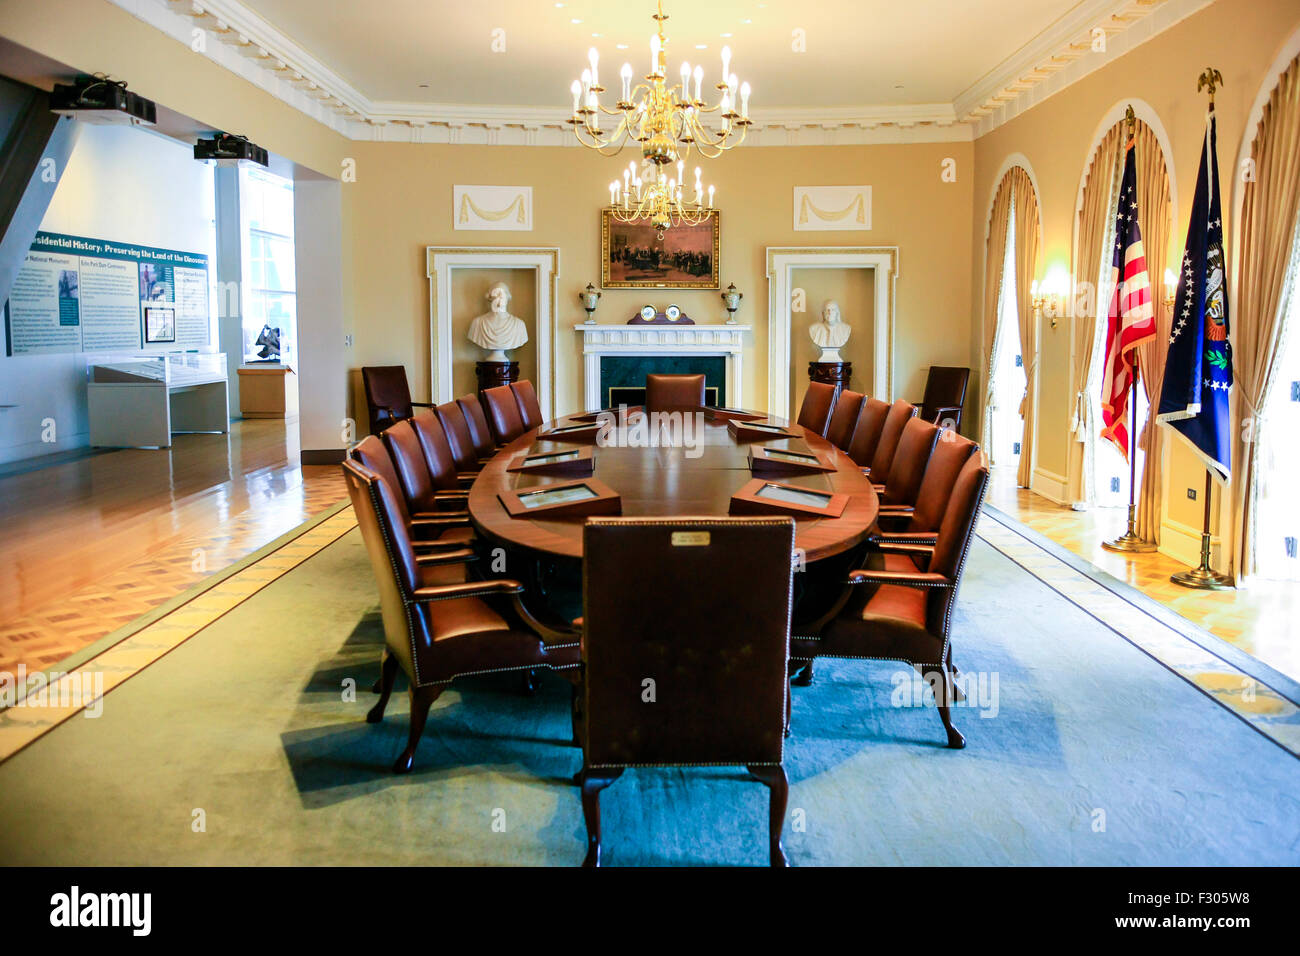 A full-size replica of the Cabinet Room at the William J. Clinton Presidential Center in Little Rock Arkansas Stock Photo